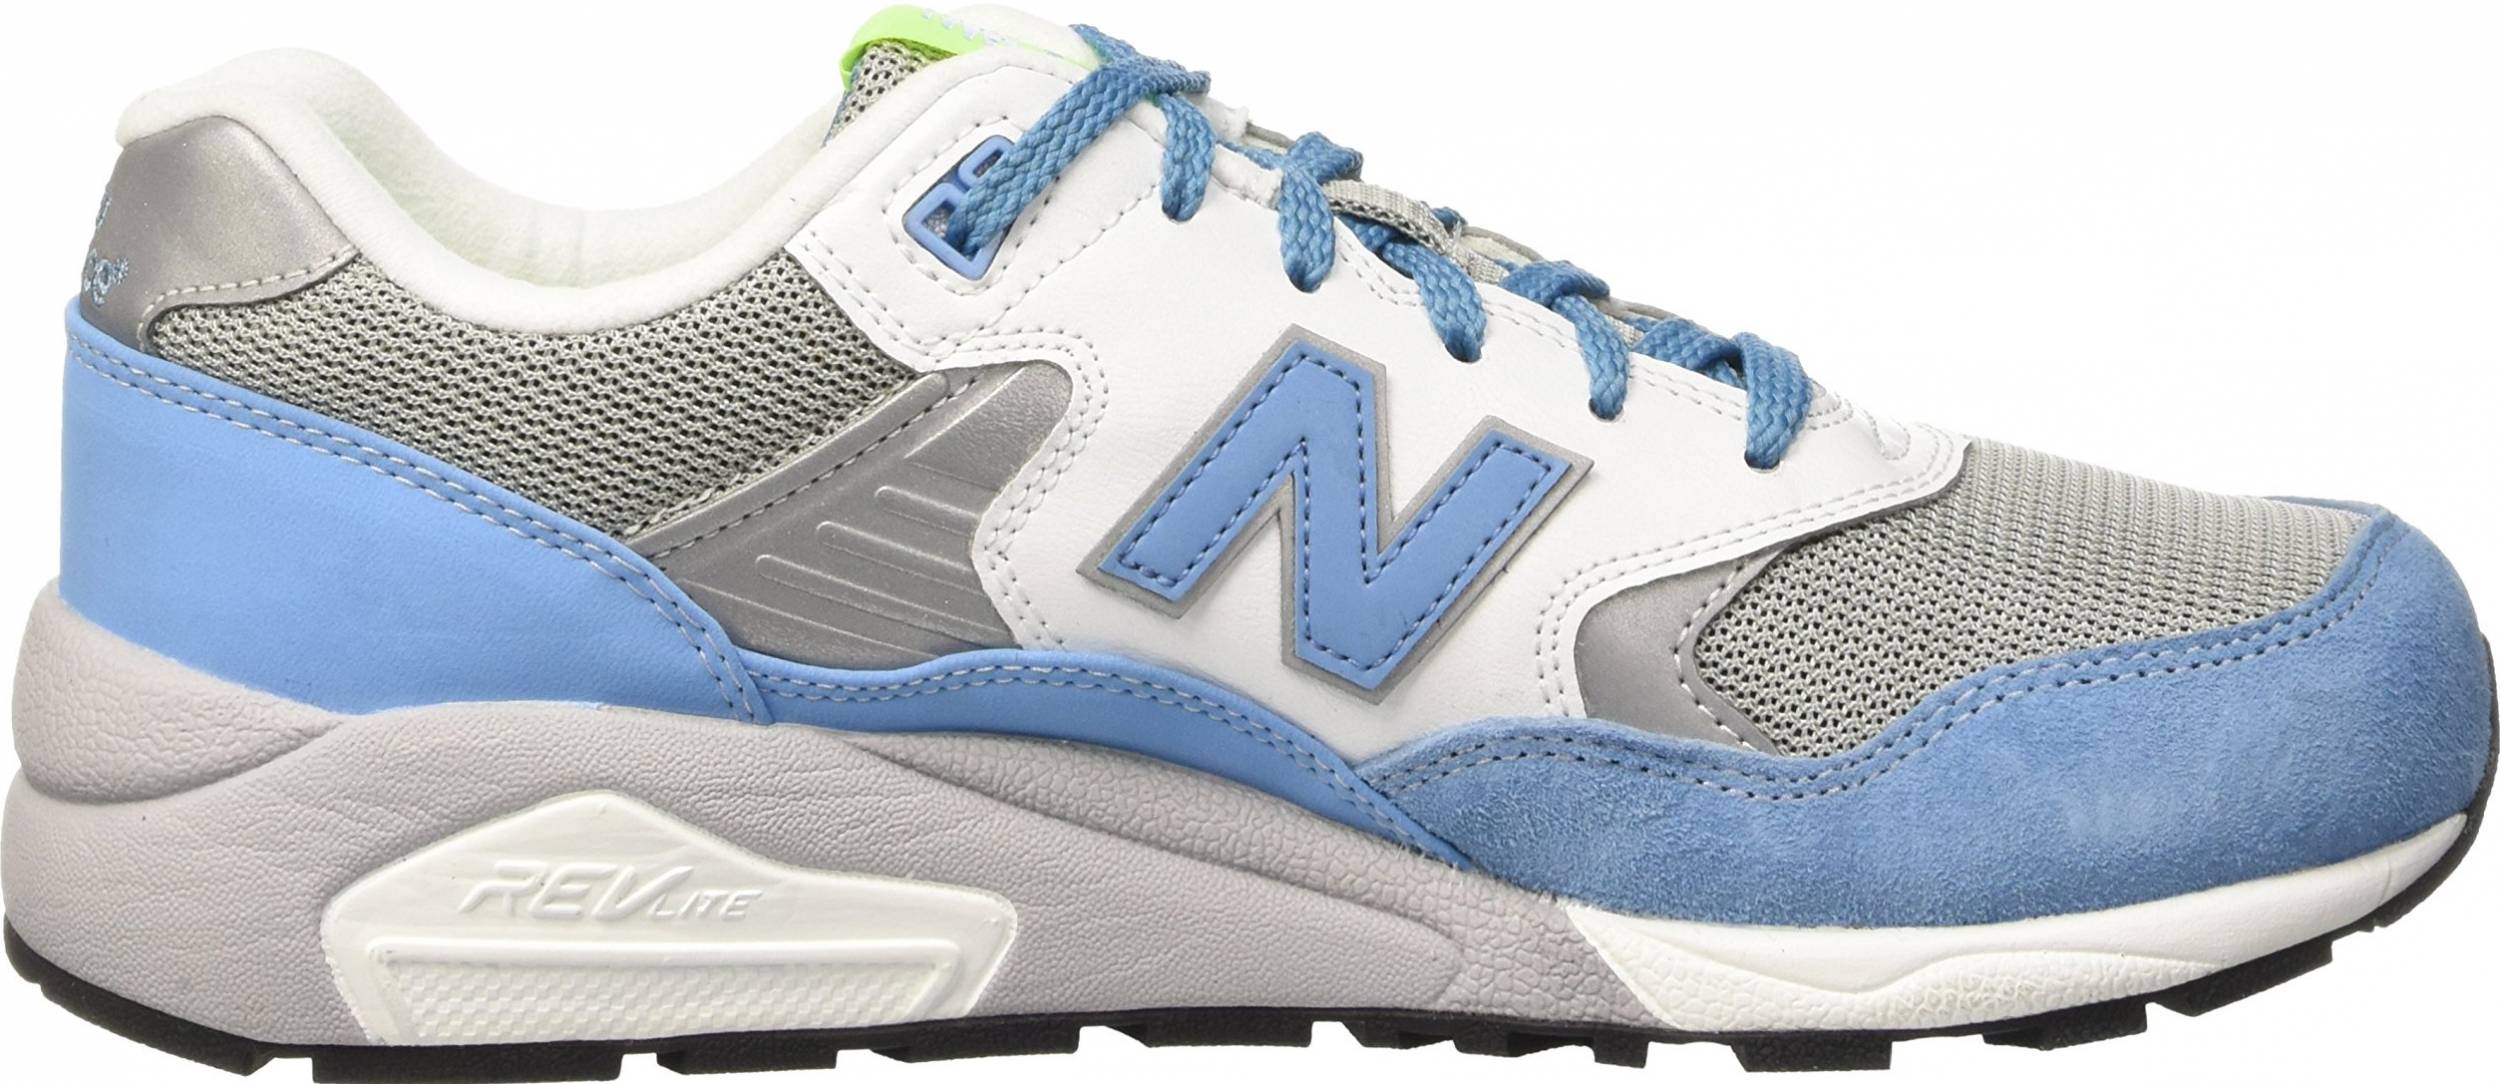 New Balance 580 sneakers in 3 colors (only $60) | RunRepeat